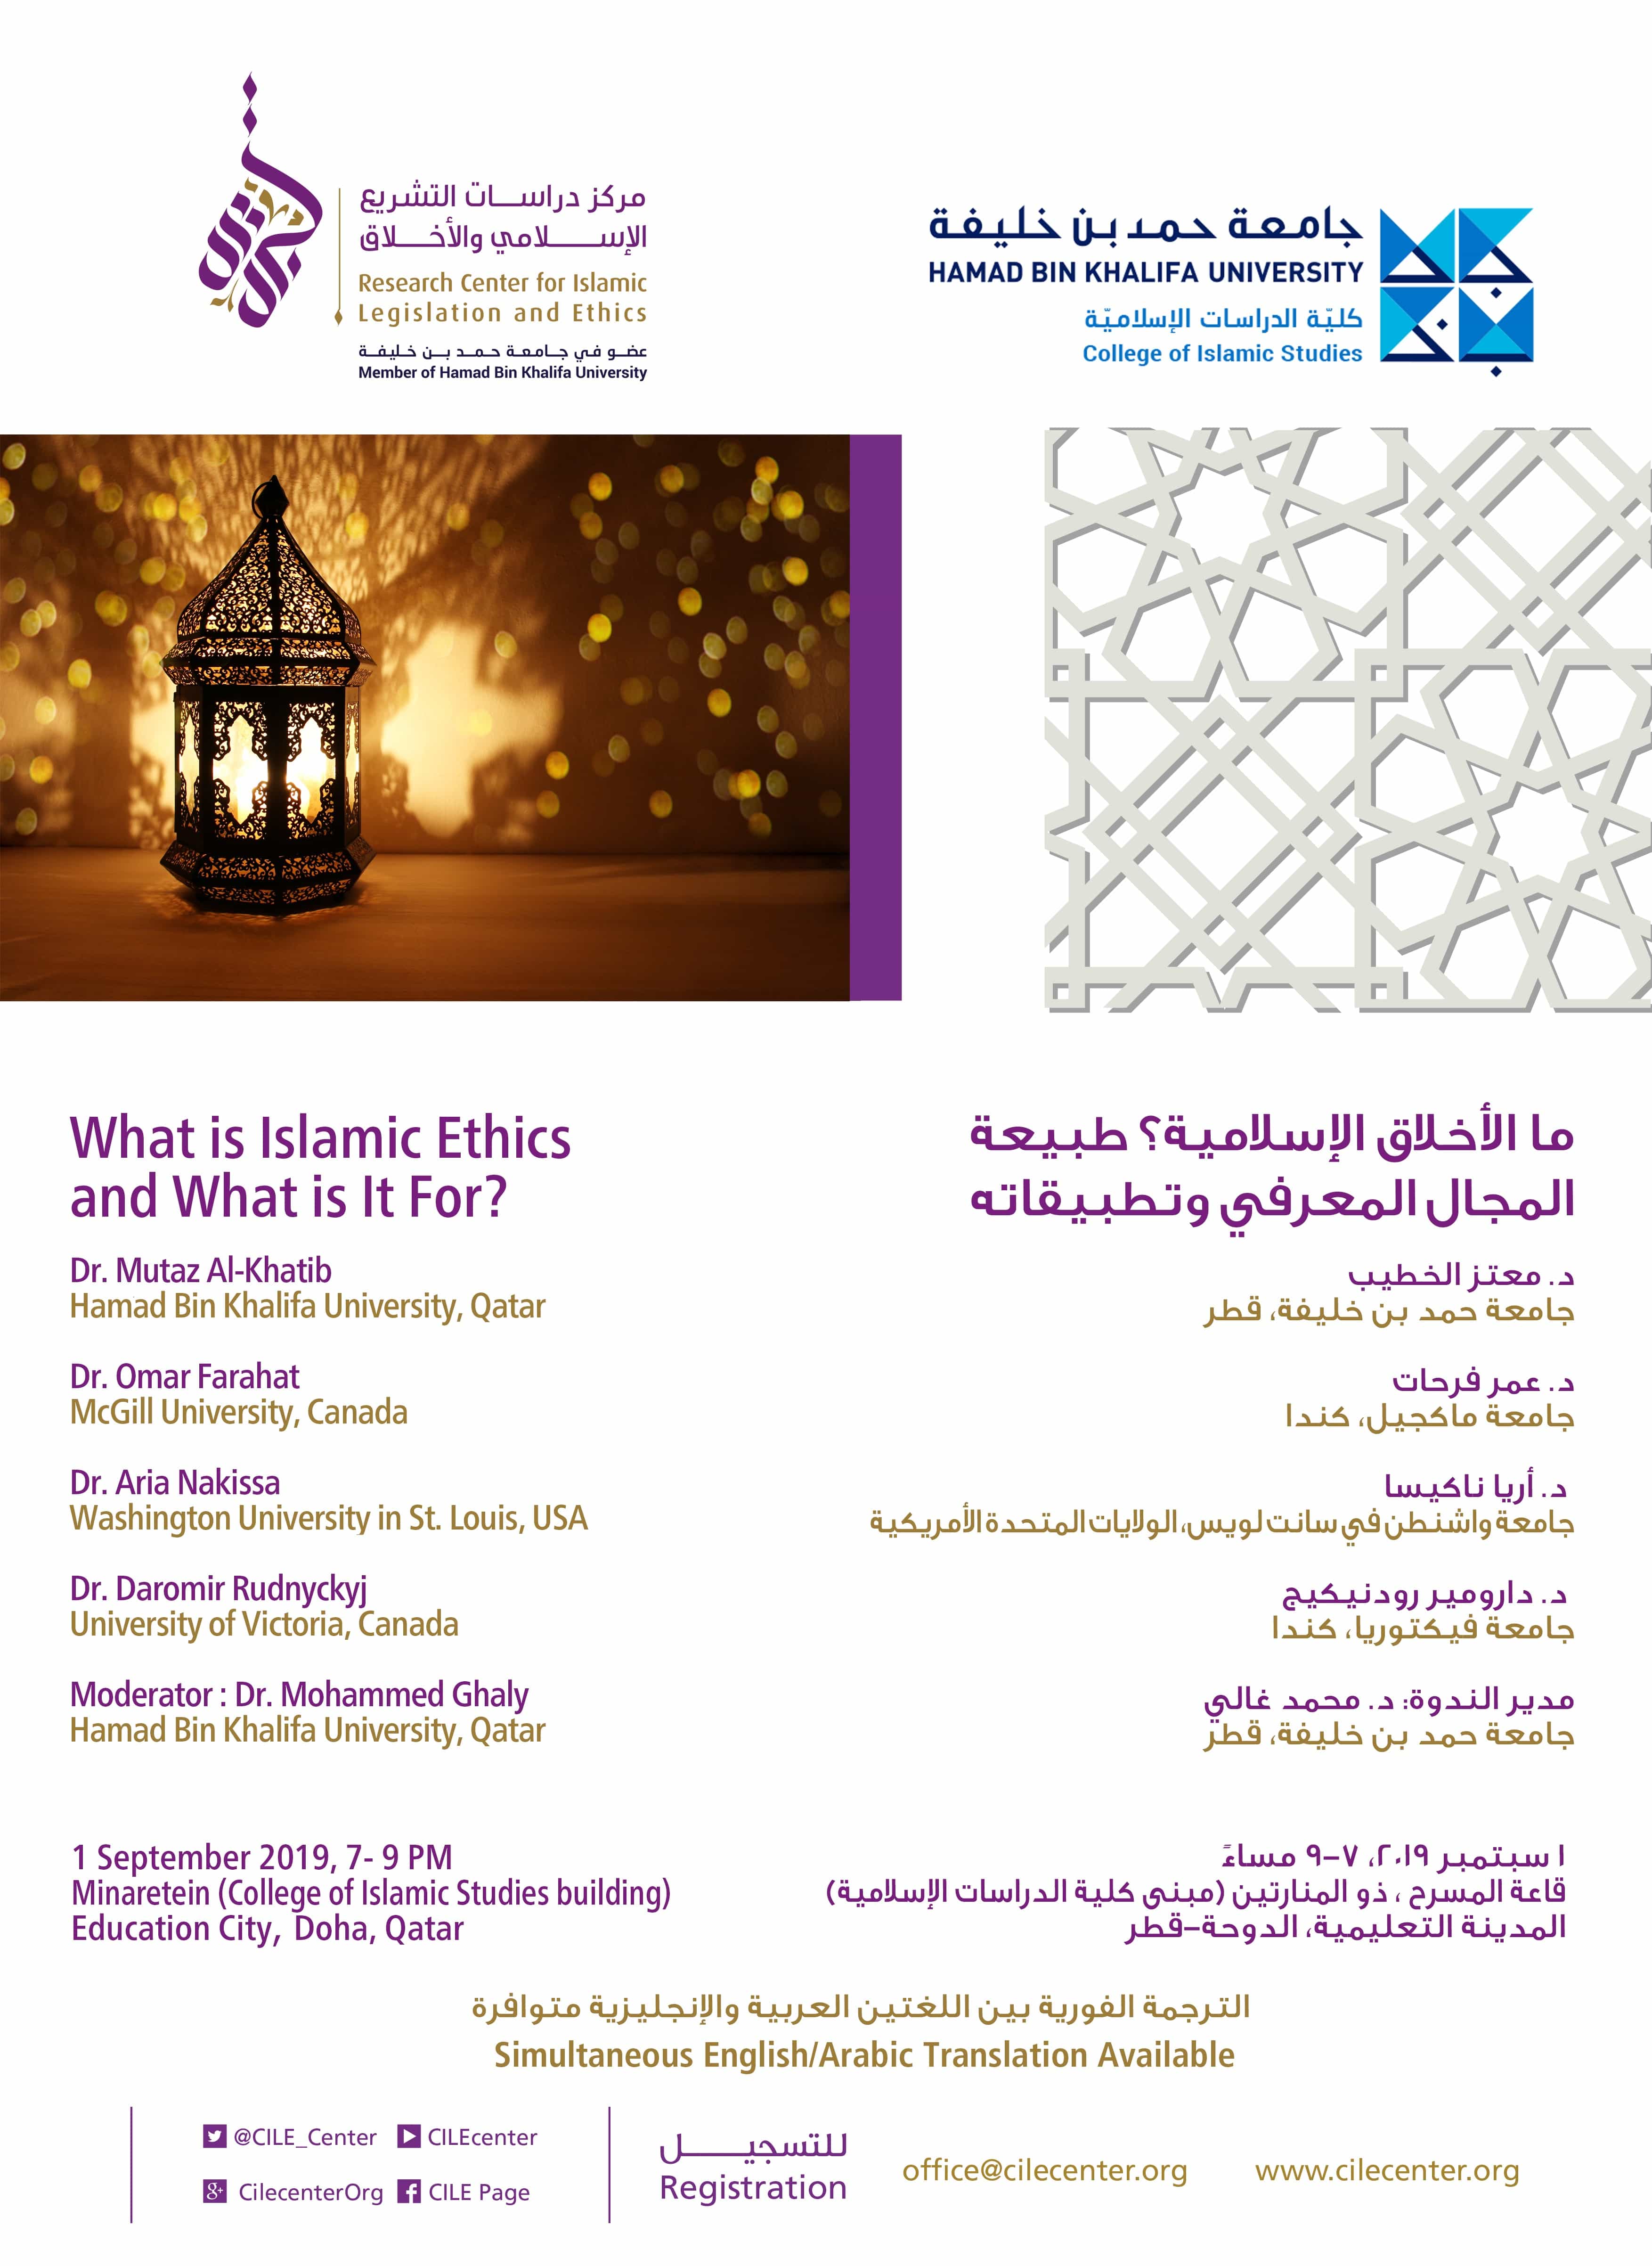 What is Islamic Ethics and what is it for?